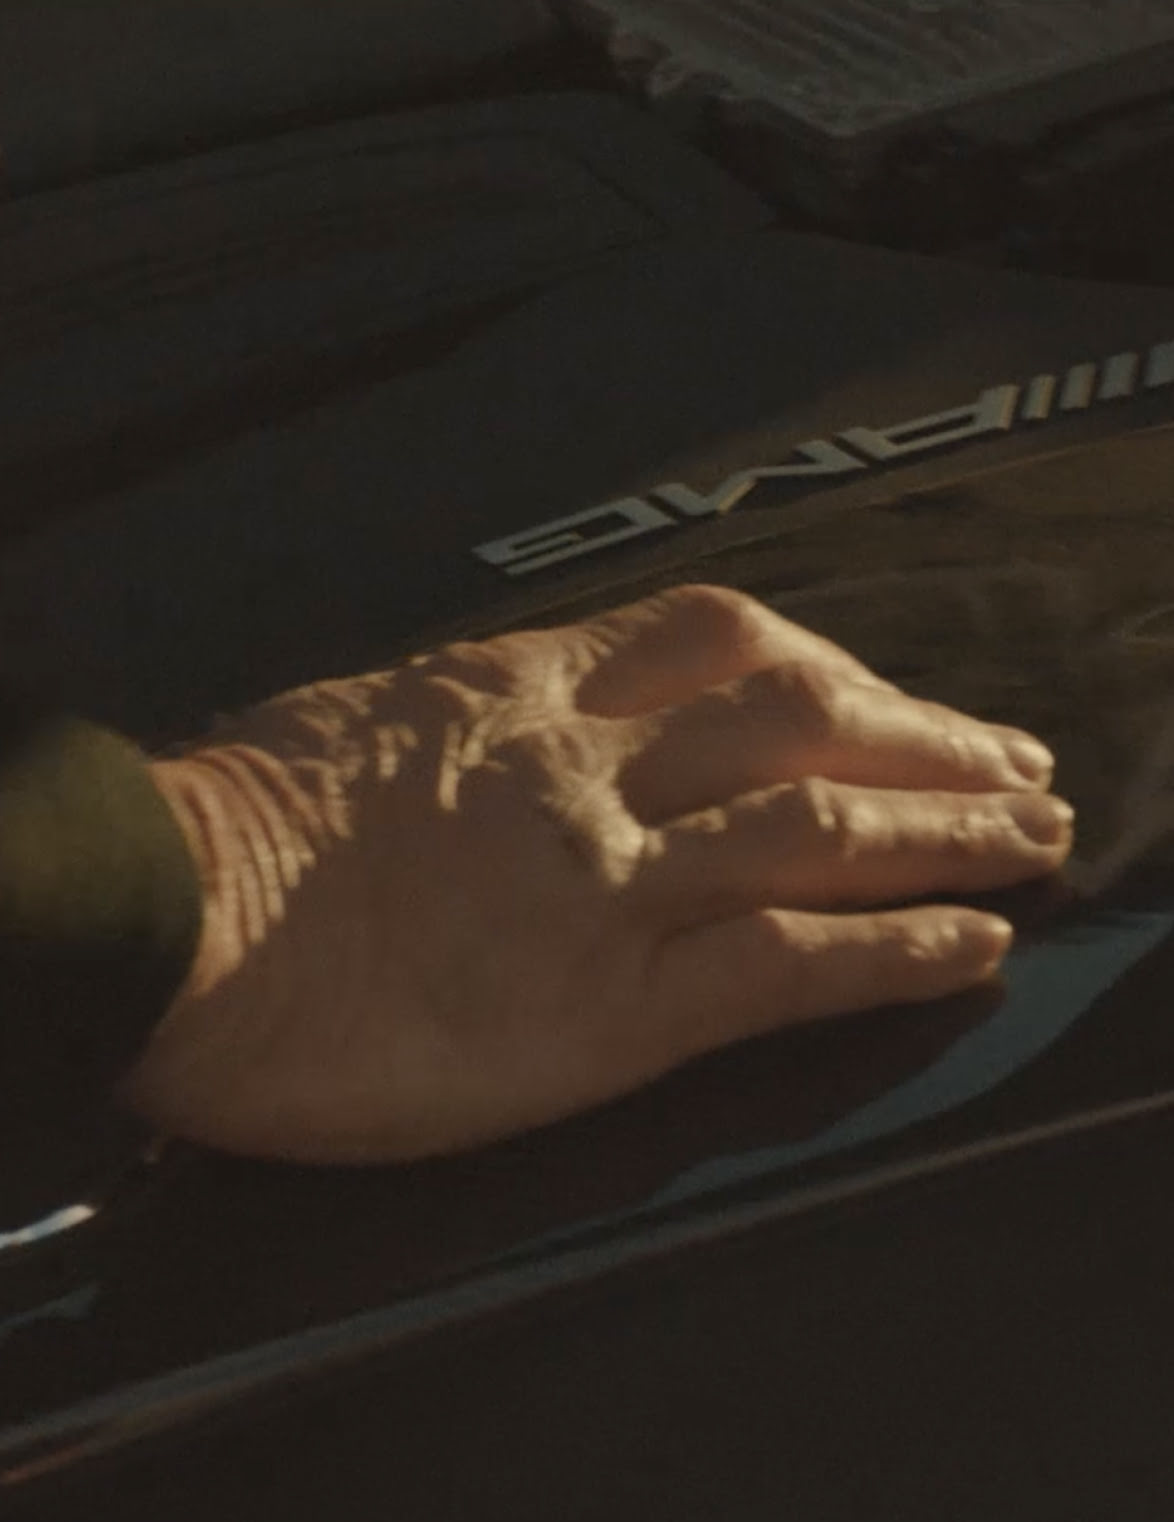 Hand of Bart Hickey, a blind mechanic, touching a Mercedes-AMG car.